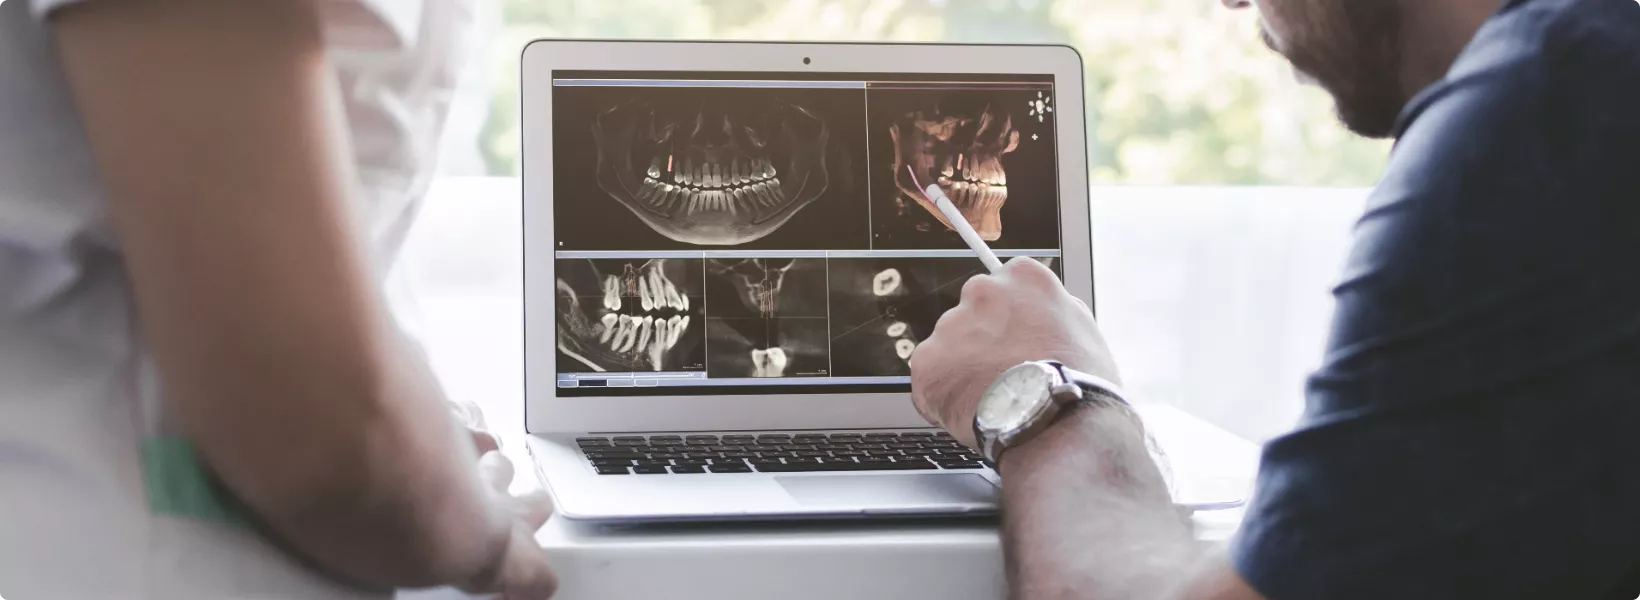 reviewing x-rays on a laptop